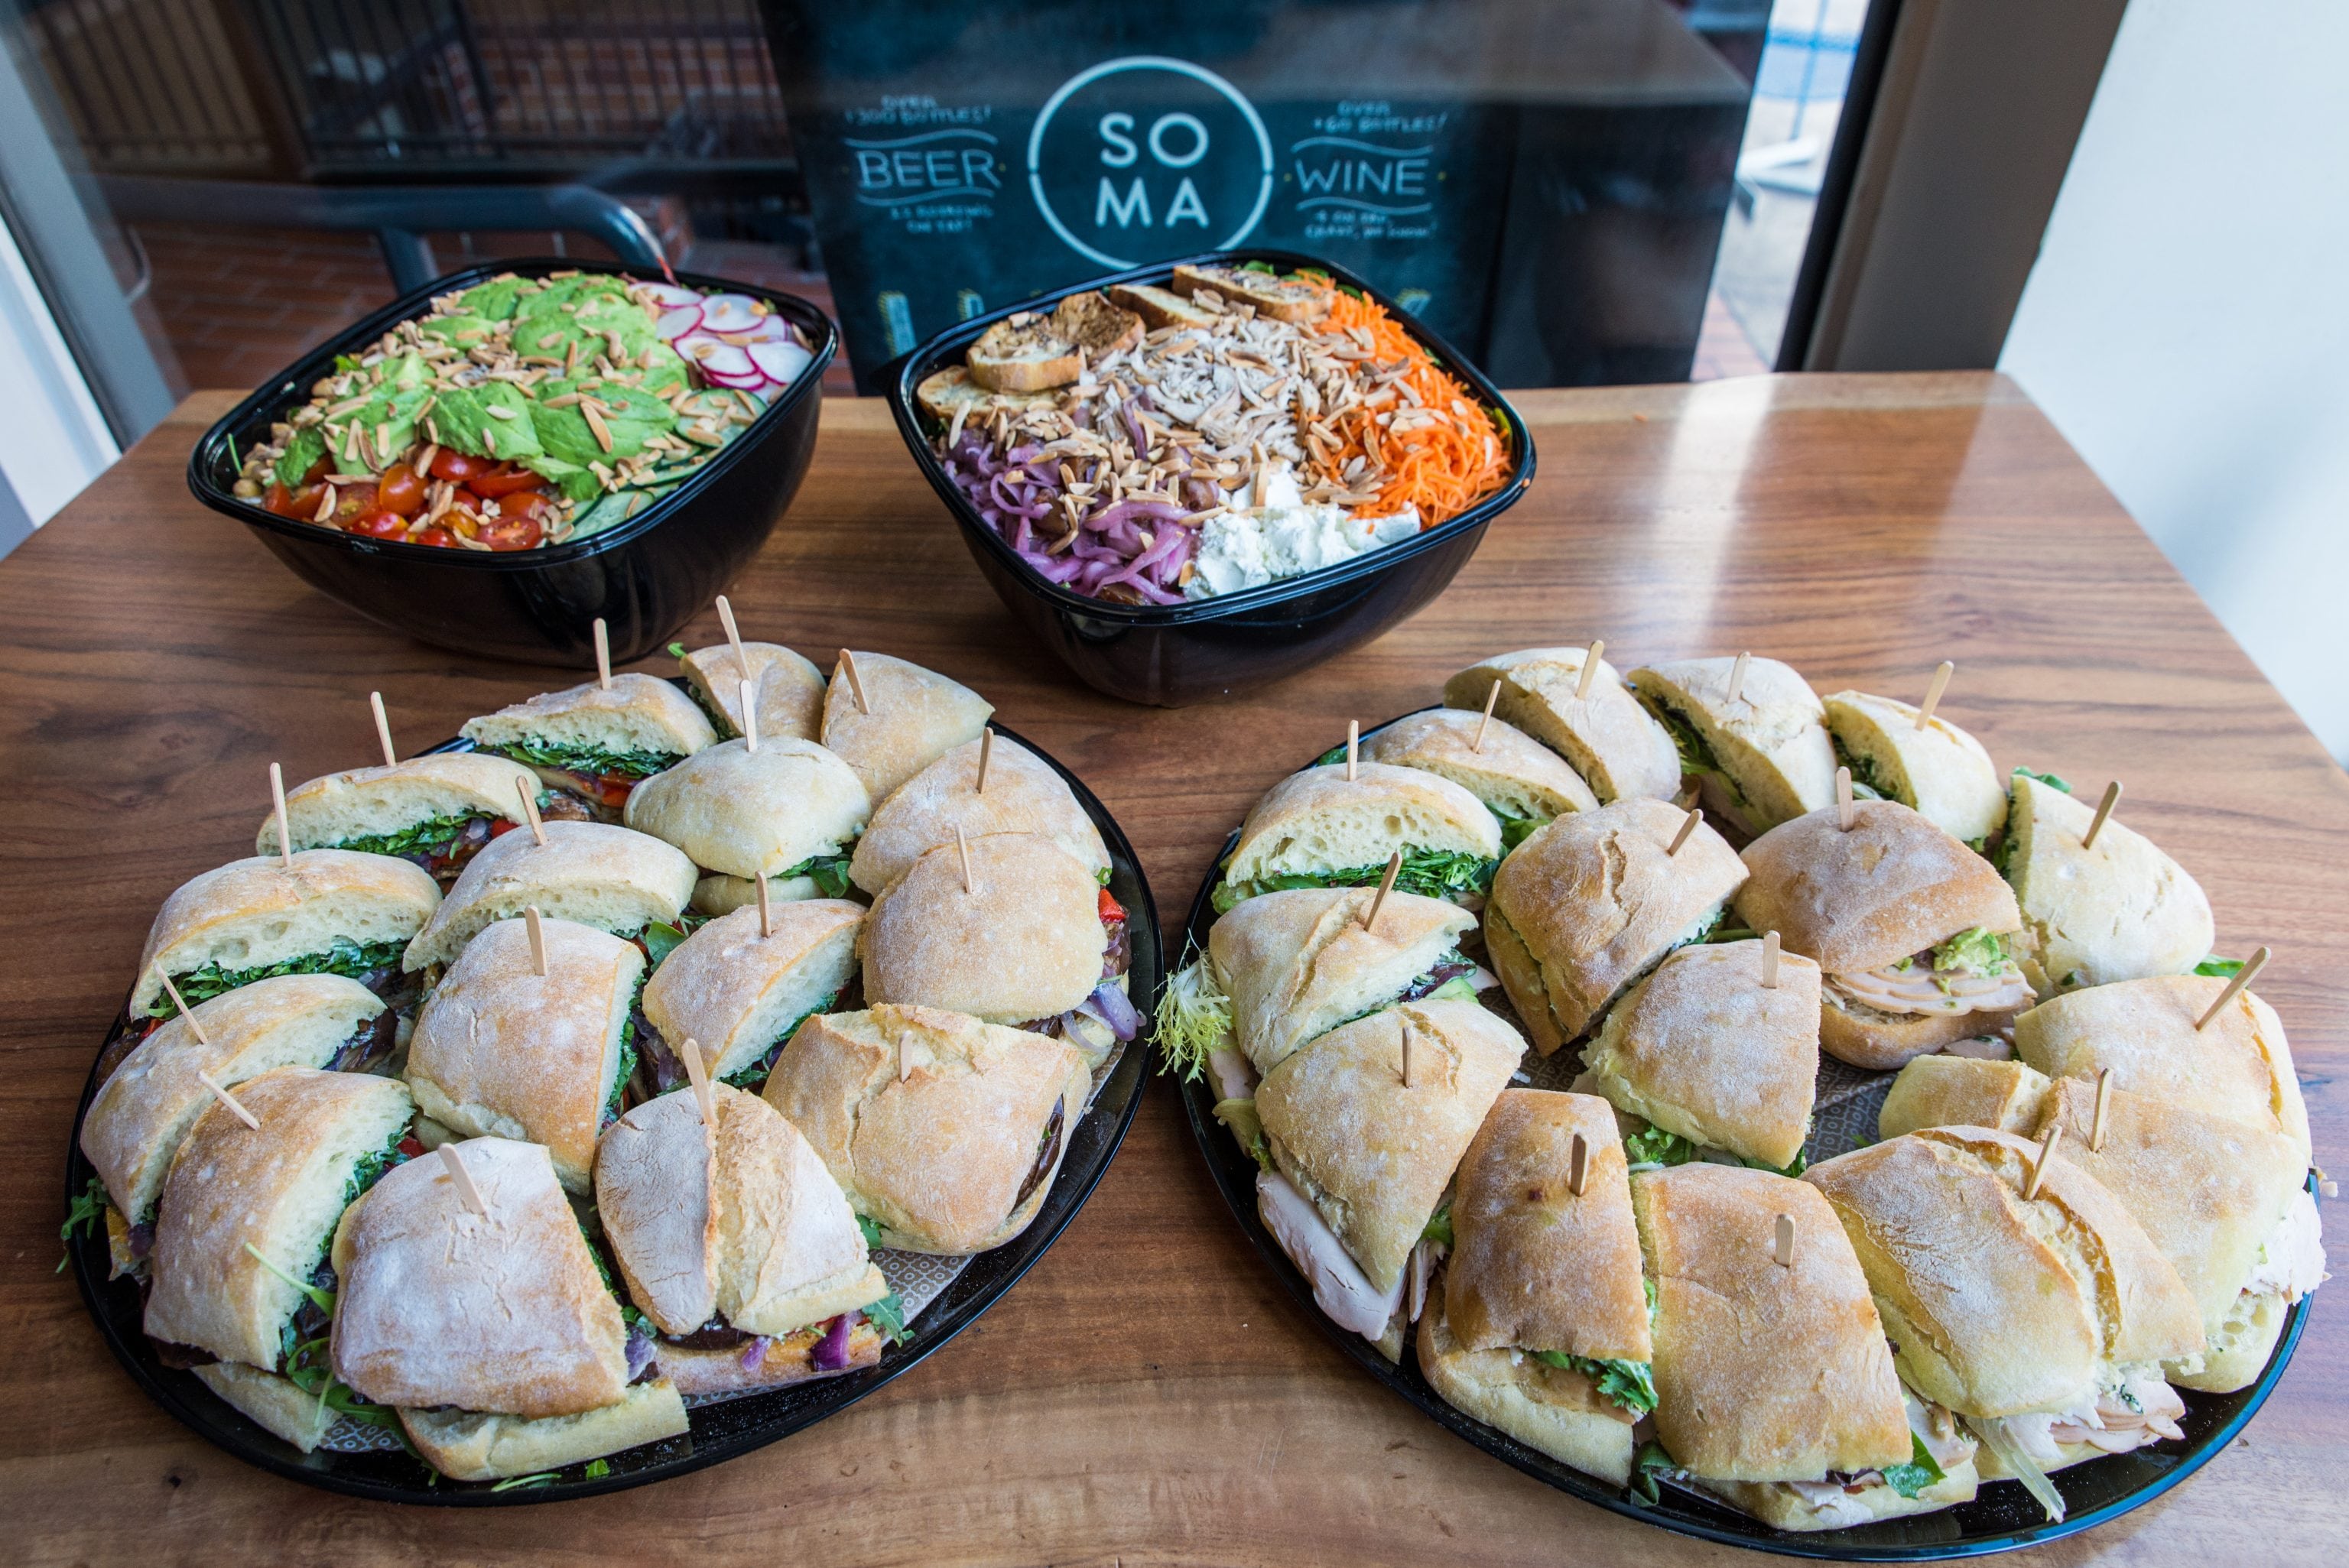 Sandwich catering in San Francisco is some of the best in the country.